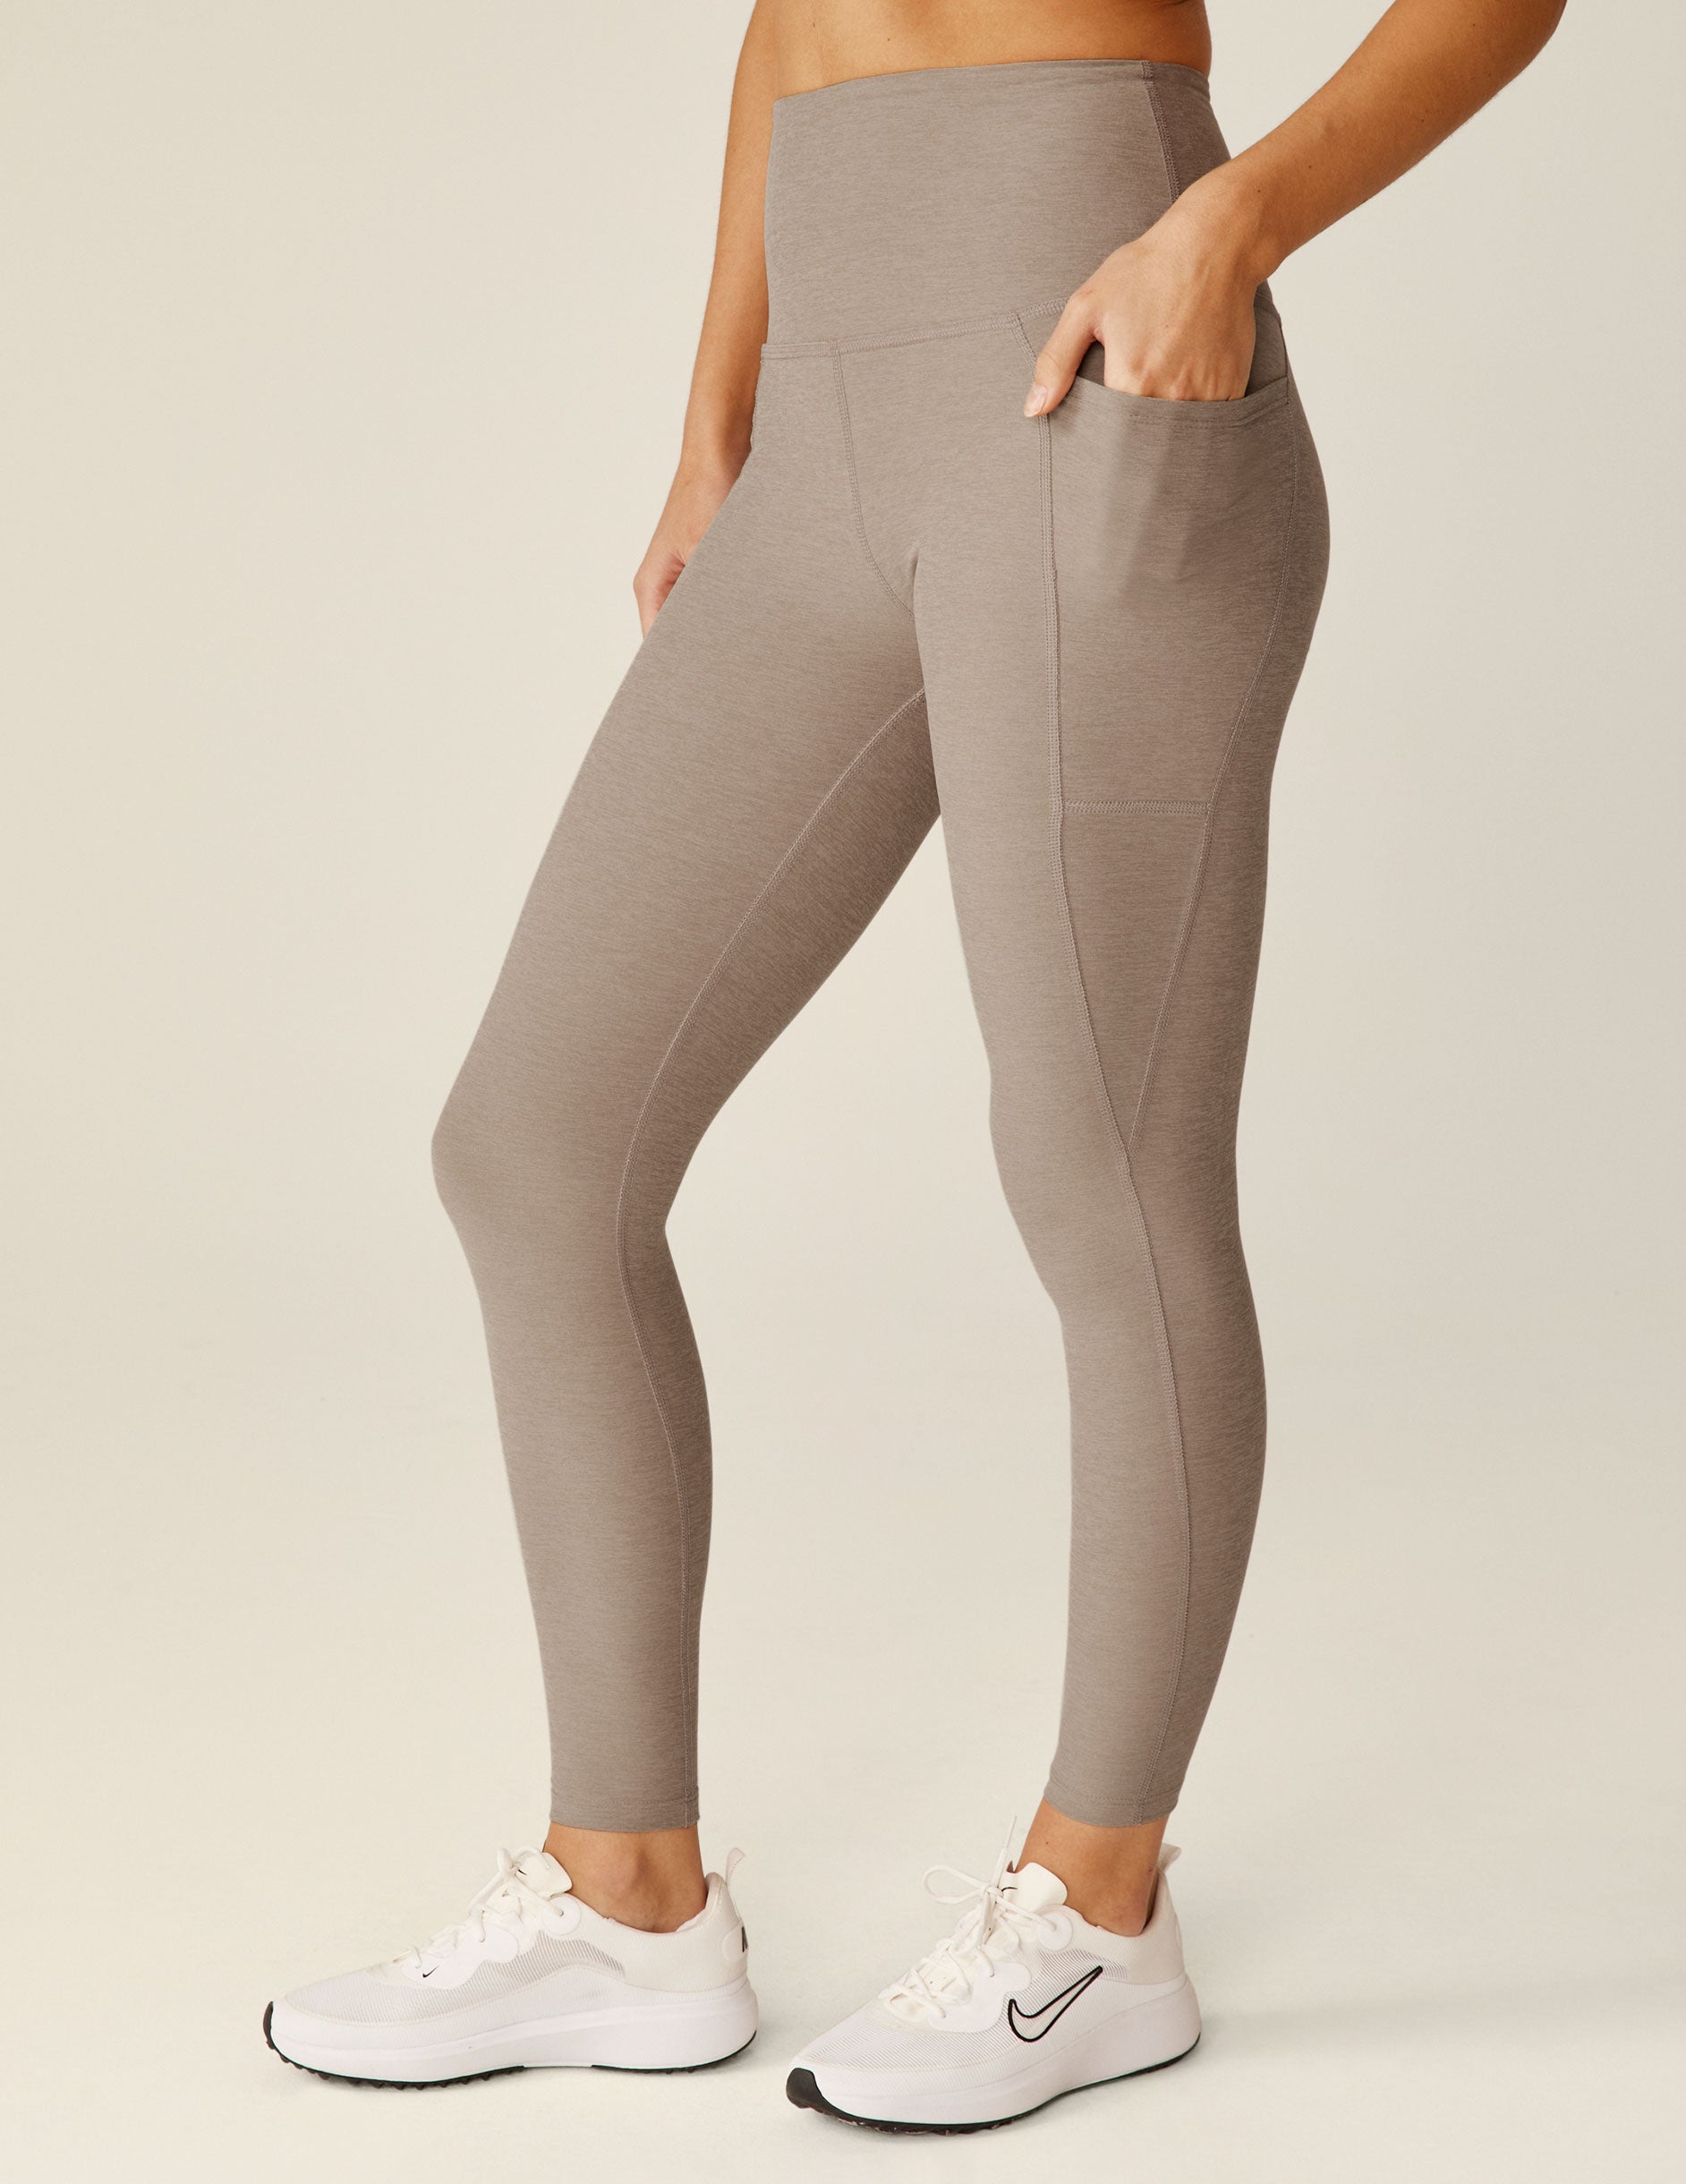 Buy Women's Yoga Pants with Pockets - Leggings with Pockets, High